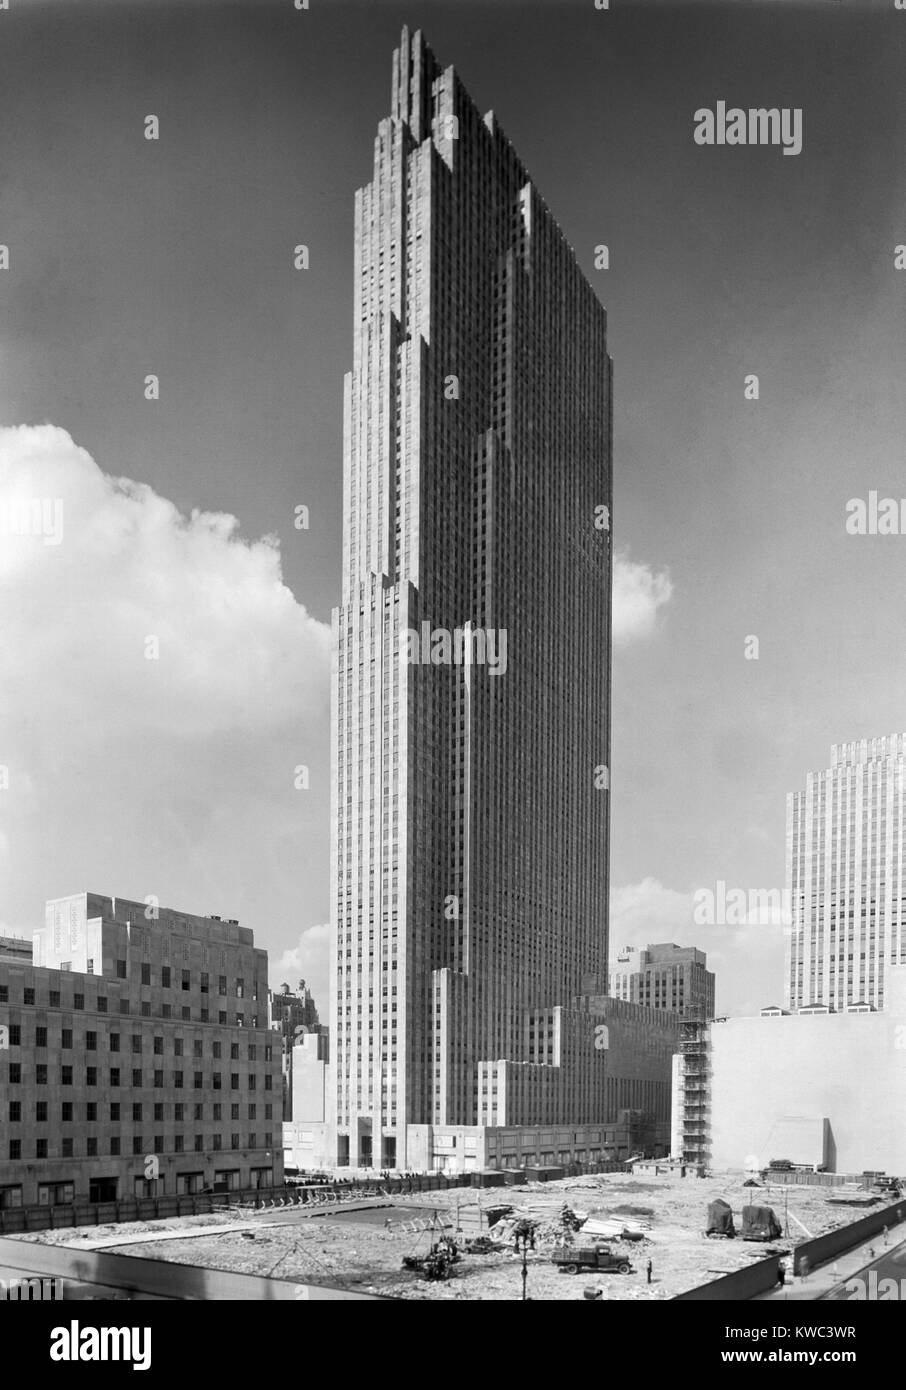 The new RCA Building in Rockefeller Center on Sept. 1, 1933. The adjacent lots await construction. It was the landmark building of the complex of 19 commercial buildings between 48th and 51st streets in New York City built between 1930 and 1939. Photo by Samuel H. Gottscho. (BSLOC 2015 14 200) Stock Photo